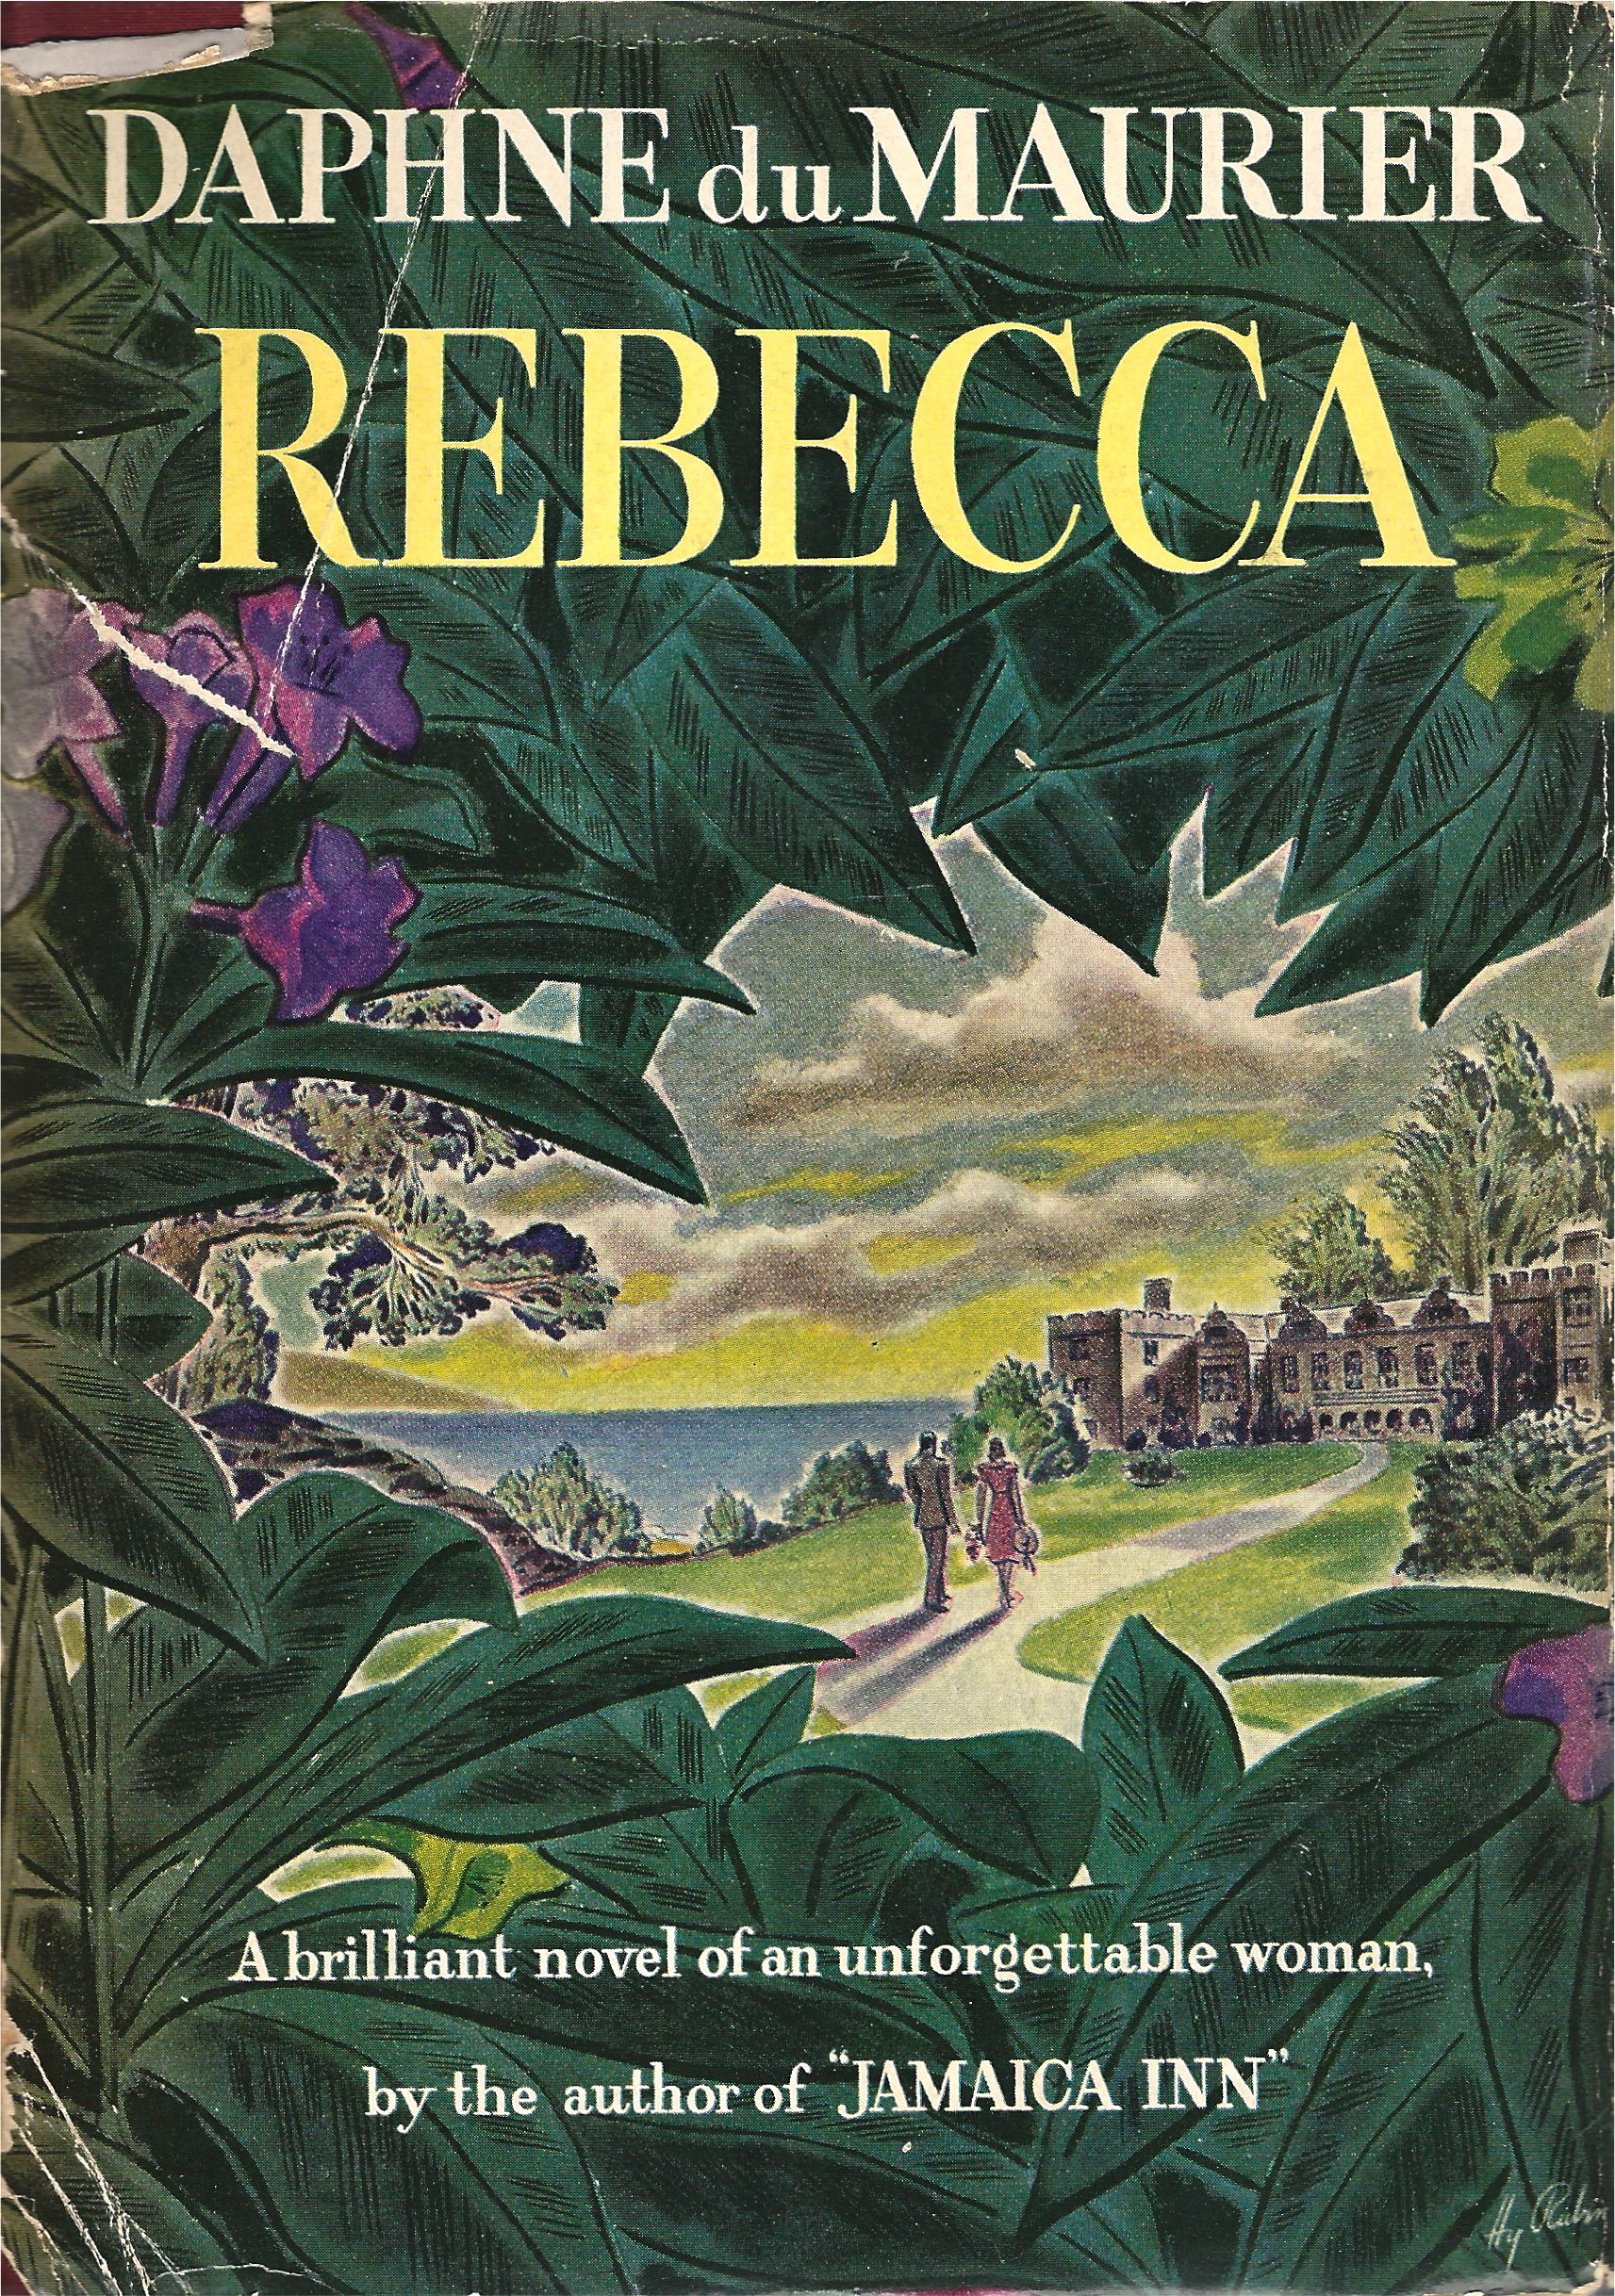 book cover for Rebecca by Daphne du Maurier